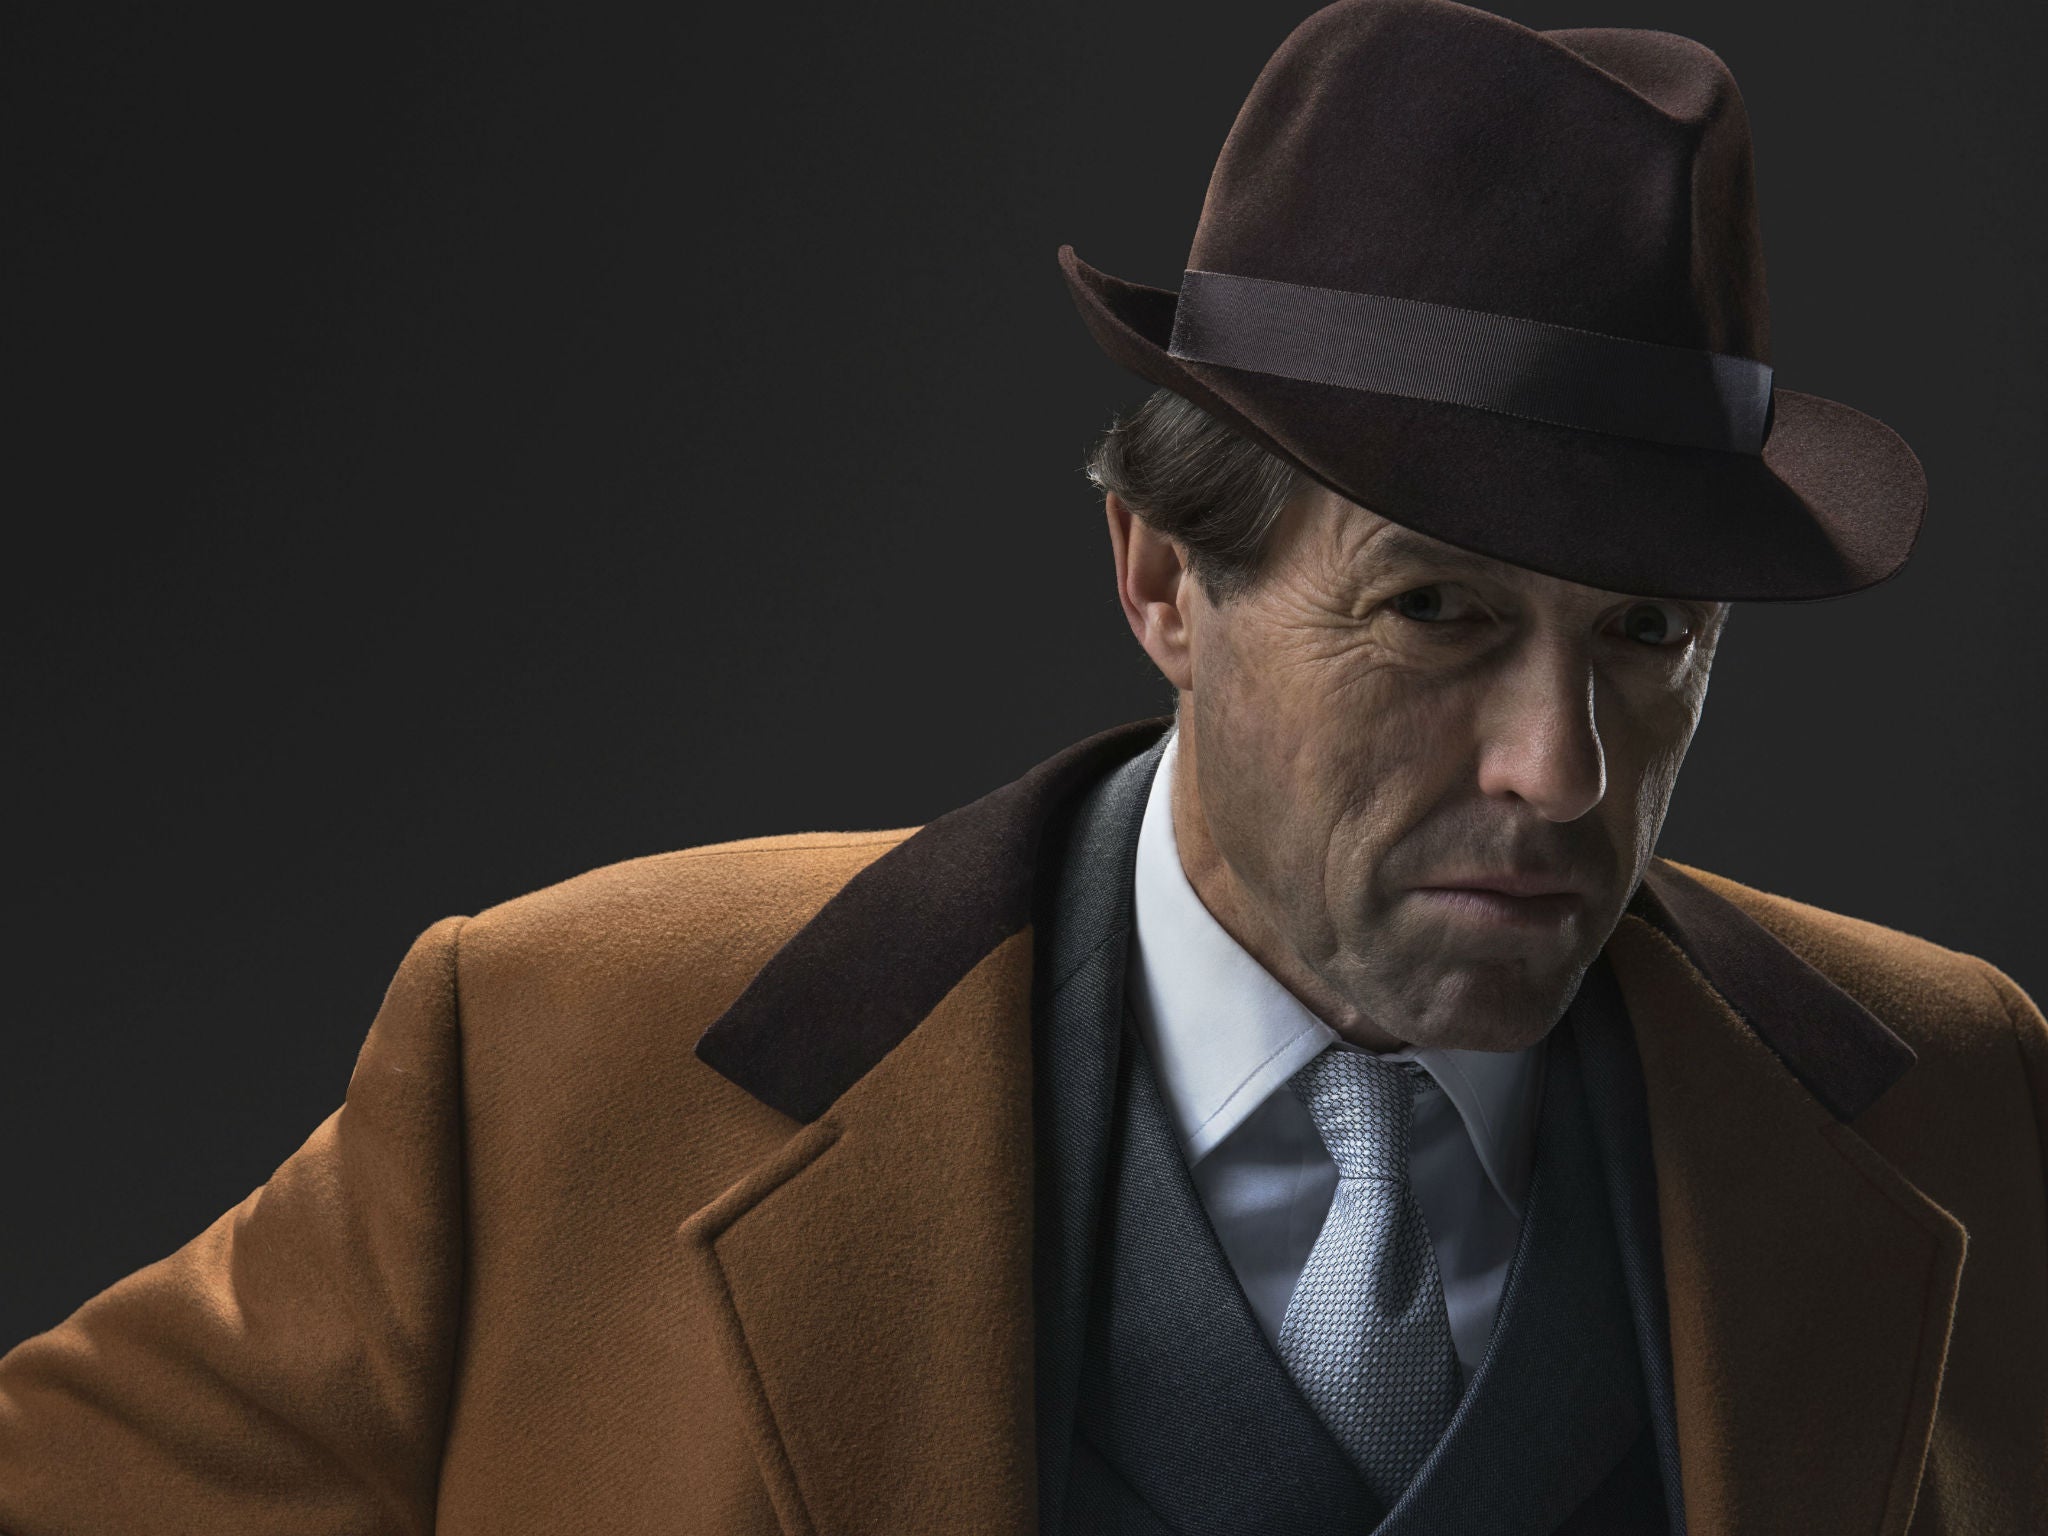 Hugh Grant as Jeremy Thorpe in the forthcoming BBC series